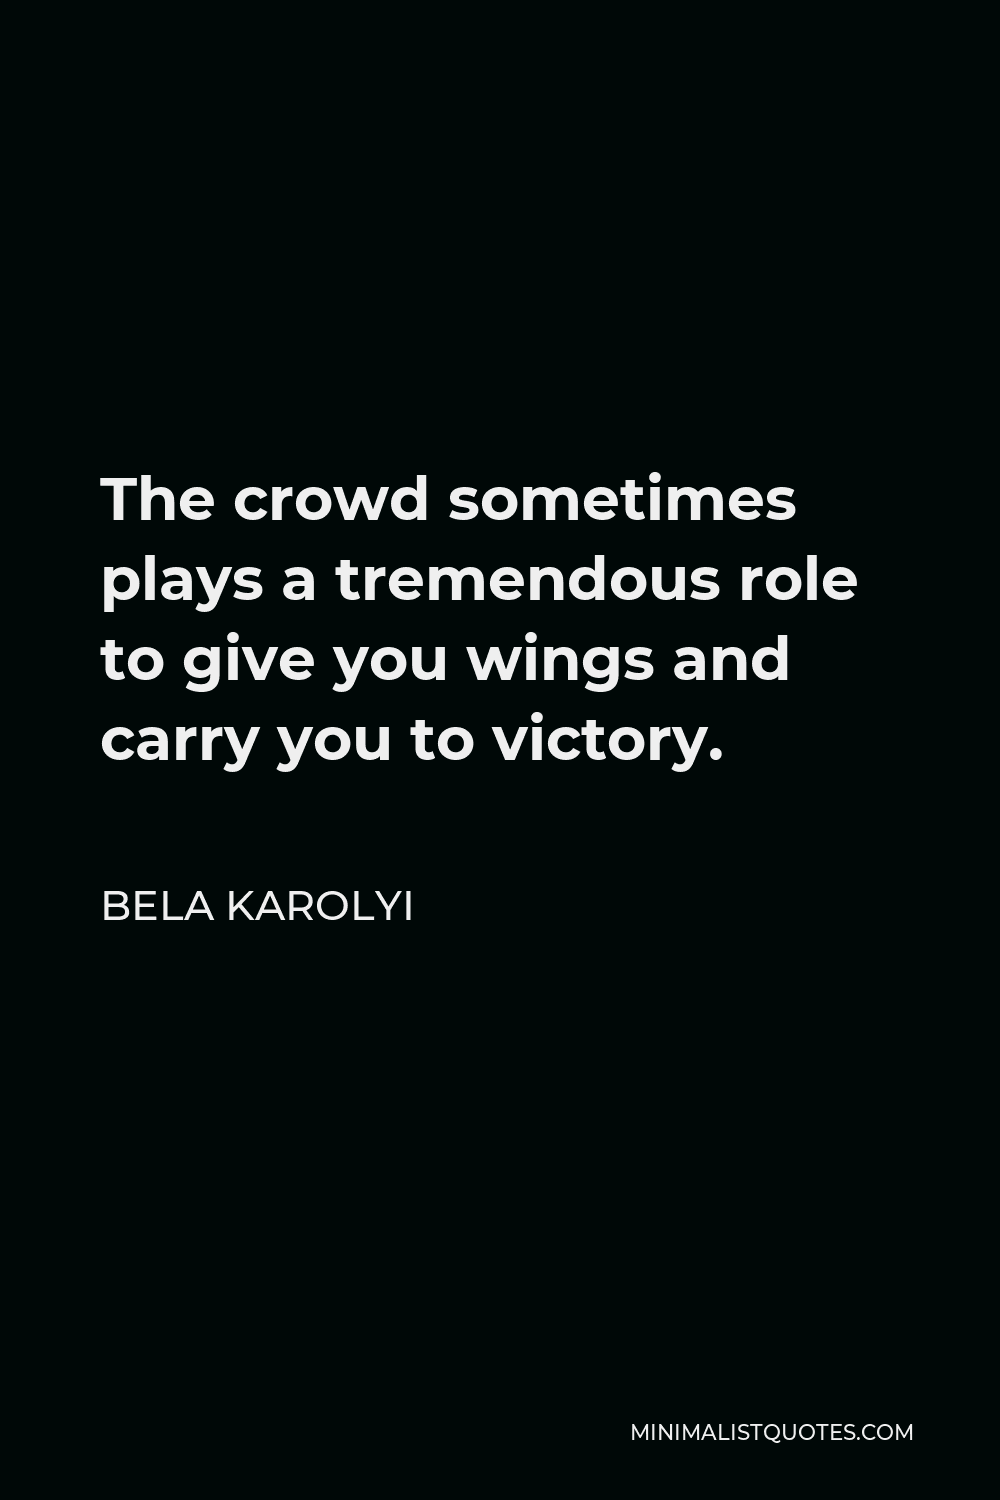 Bela Karolyi Quote - The crowd sometimes plays a tremendous role to give you wings and carry you to victory.